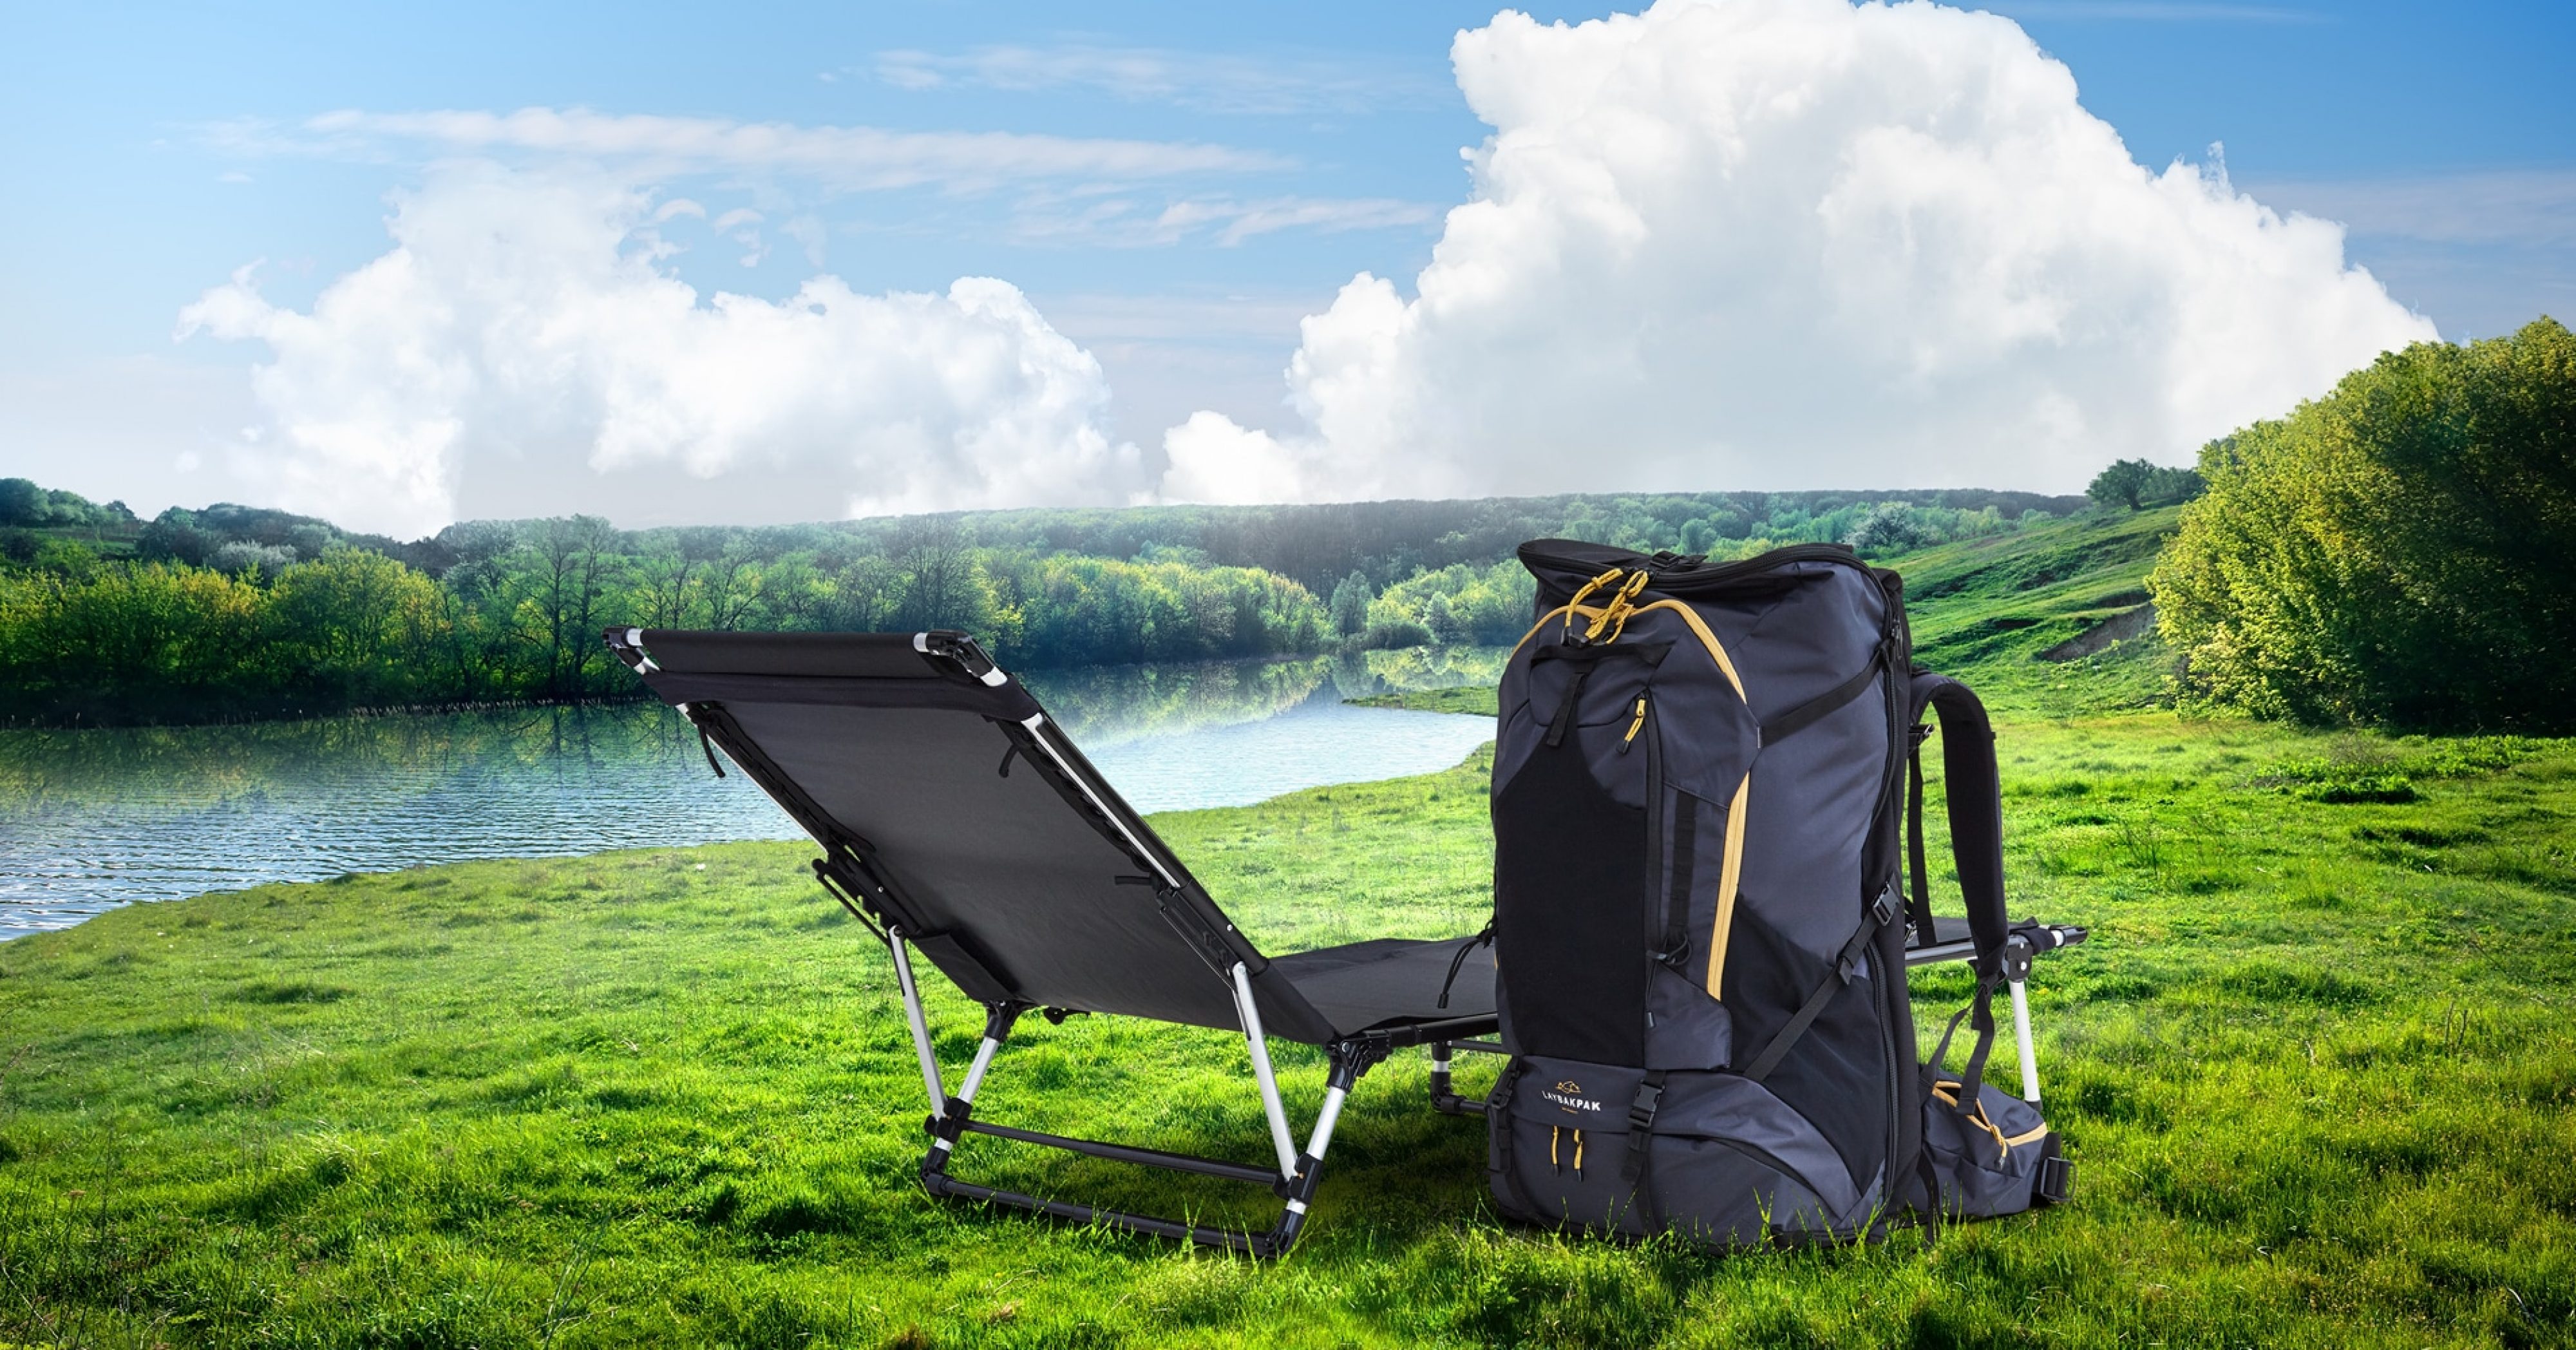 LayBakPak backpack with bed set up as a recliner beside a river